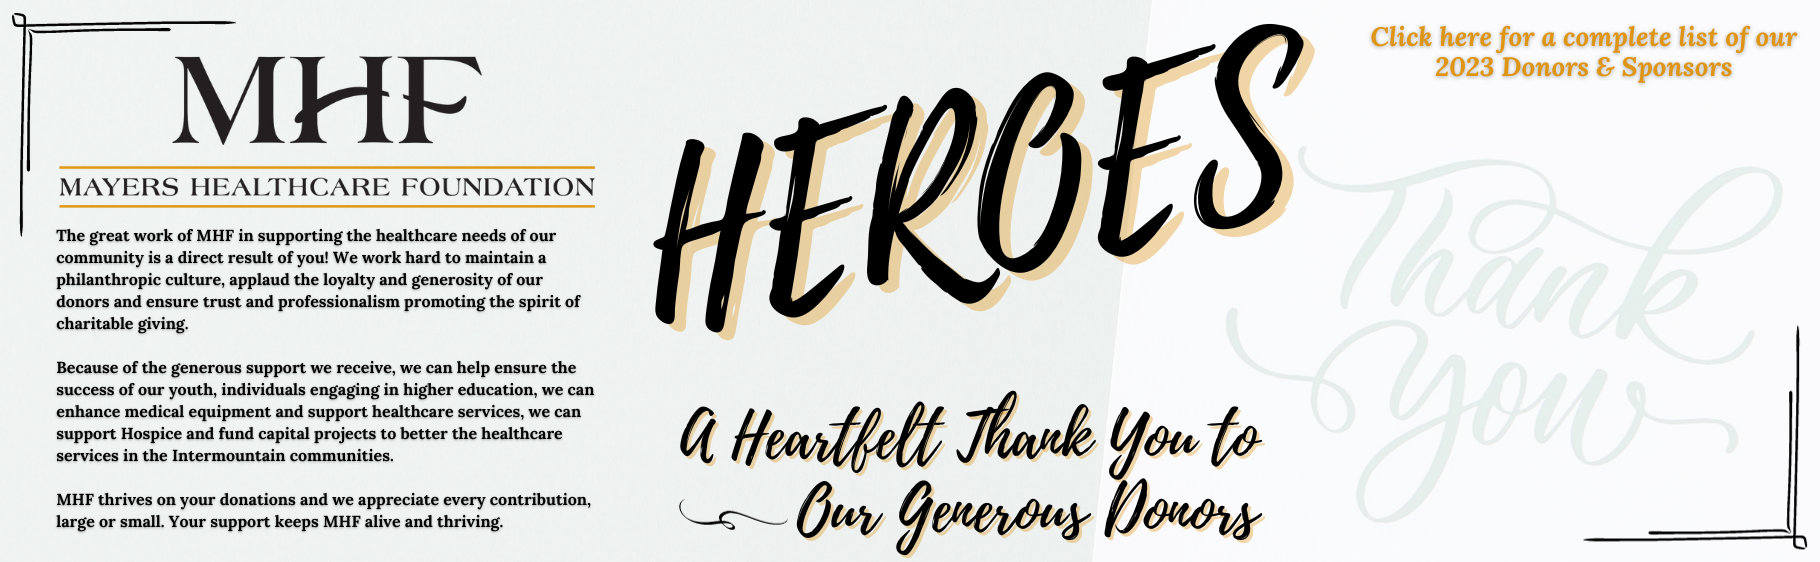 Our Donors - Our Heros!

A heartfelt thank you to our generous donors.